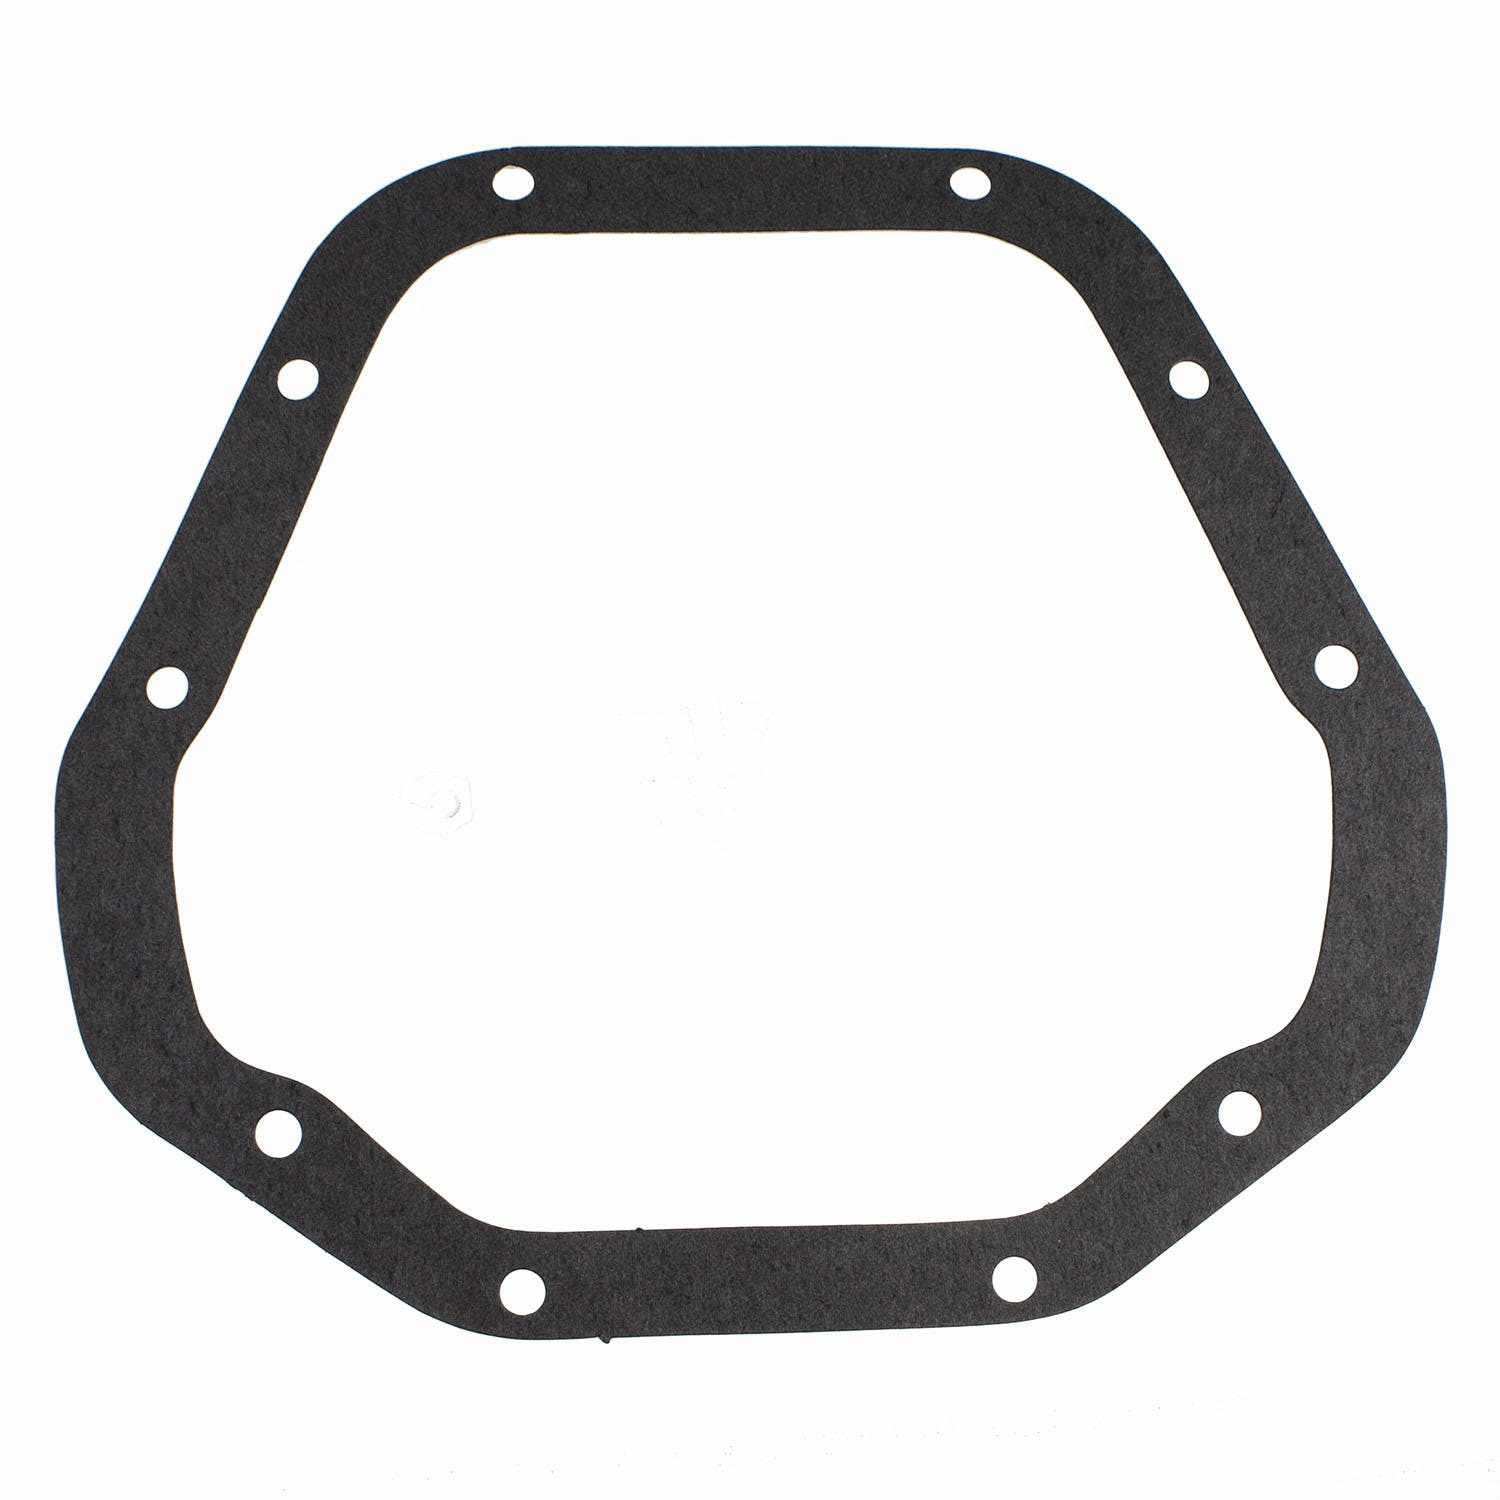 Motive Gear 5117 Differential Cover Gasket